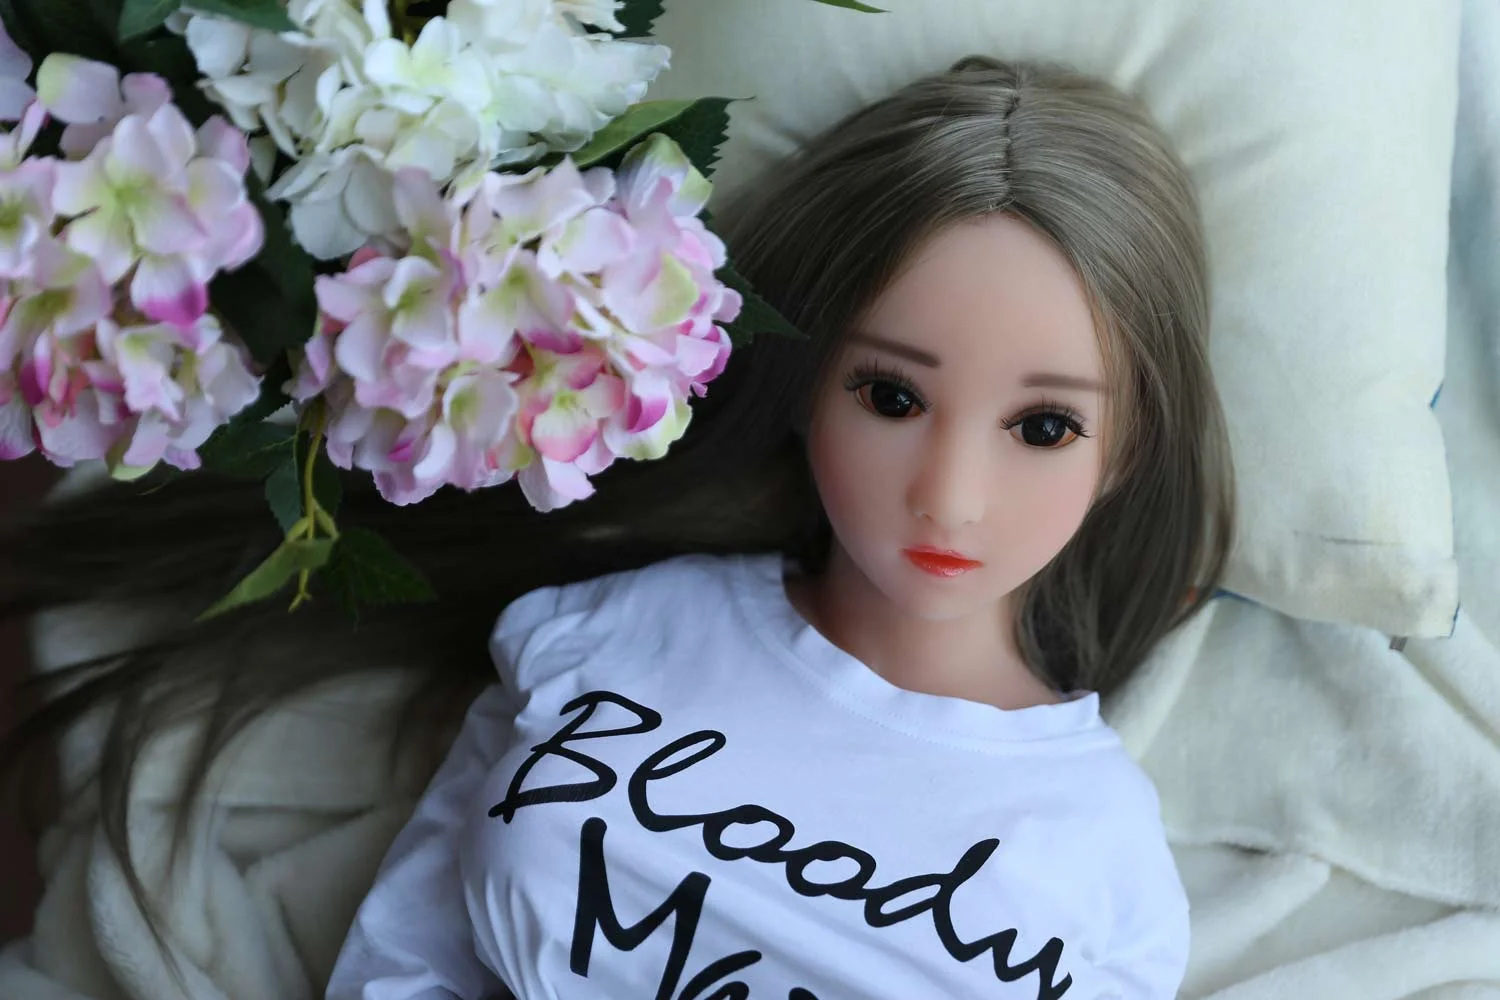 Mini sex doll lying on the bed